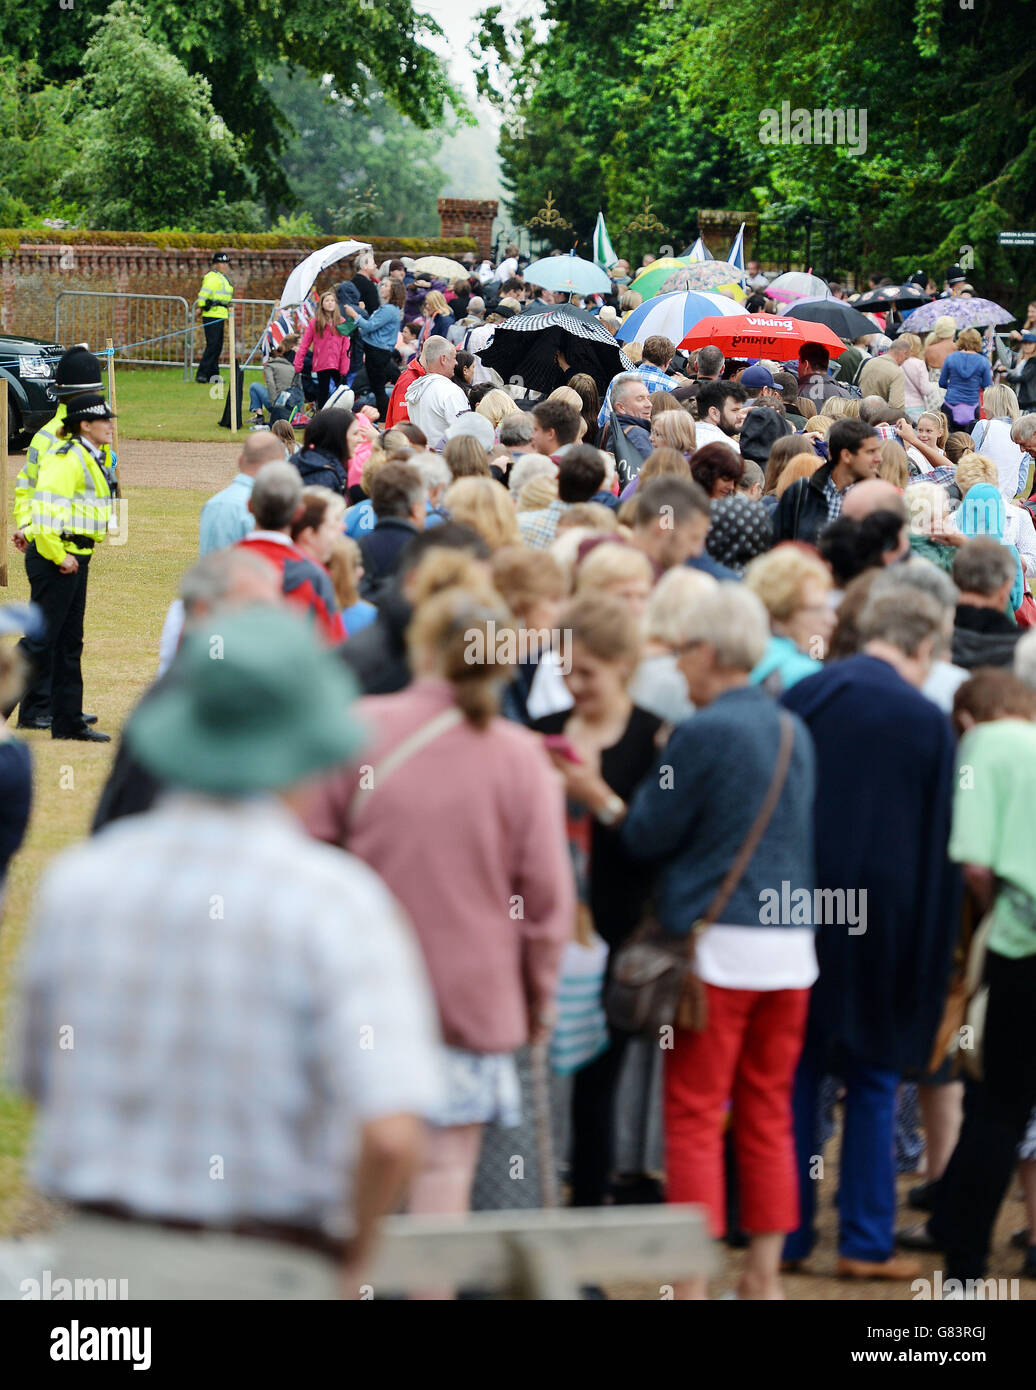 A large crowd of loyal royal fans near the area around the Church of St Mary Magdalene in Sandringham, Norfolk, as Princess Charlotte will be christened in front of the Queen and close family. Stock Photo